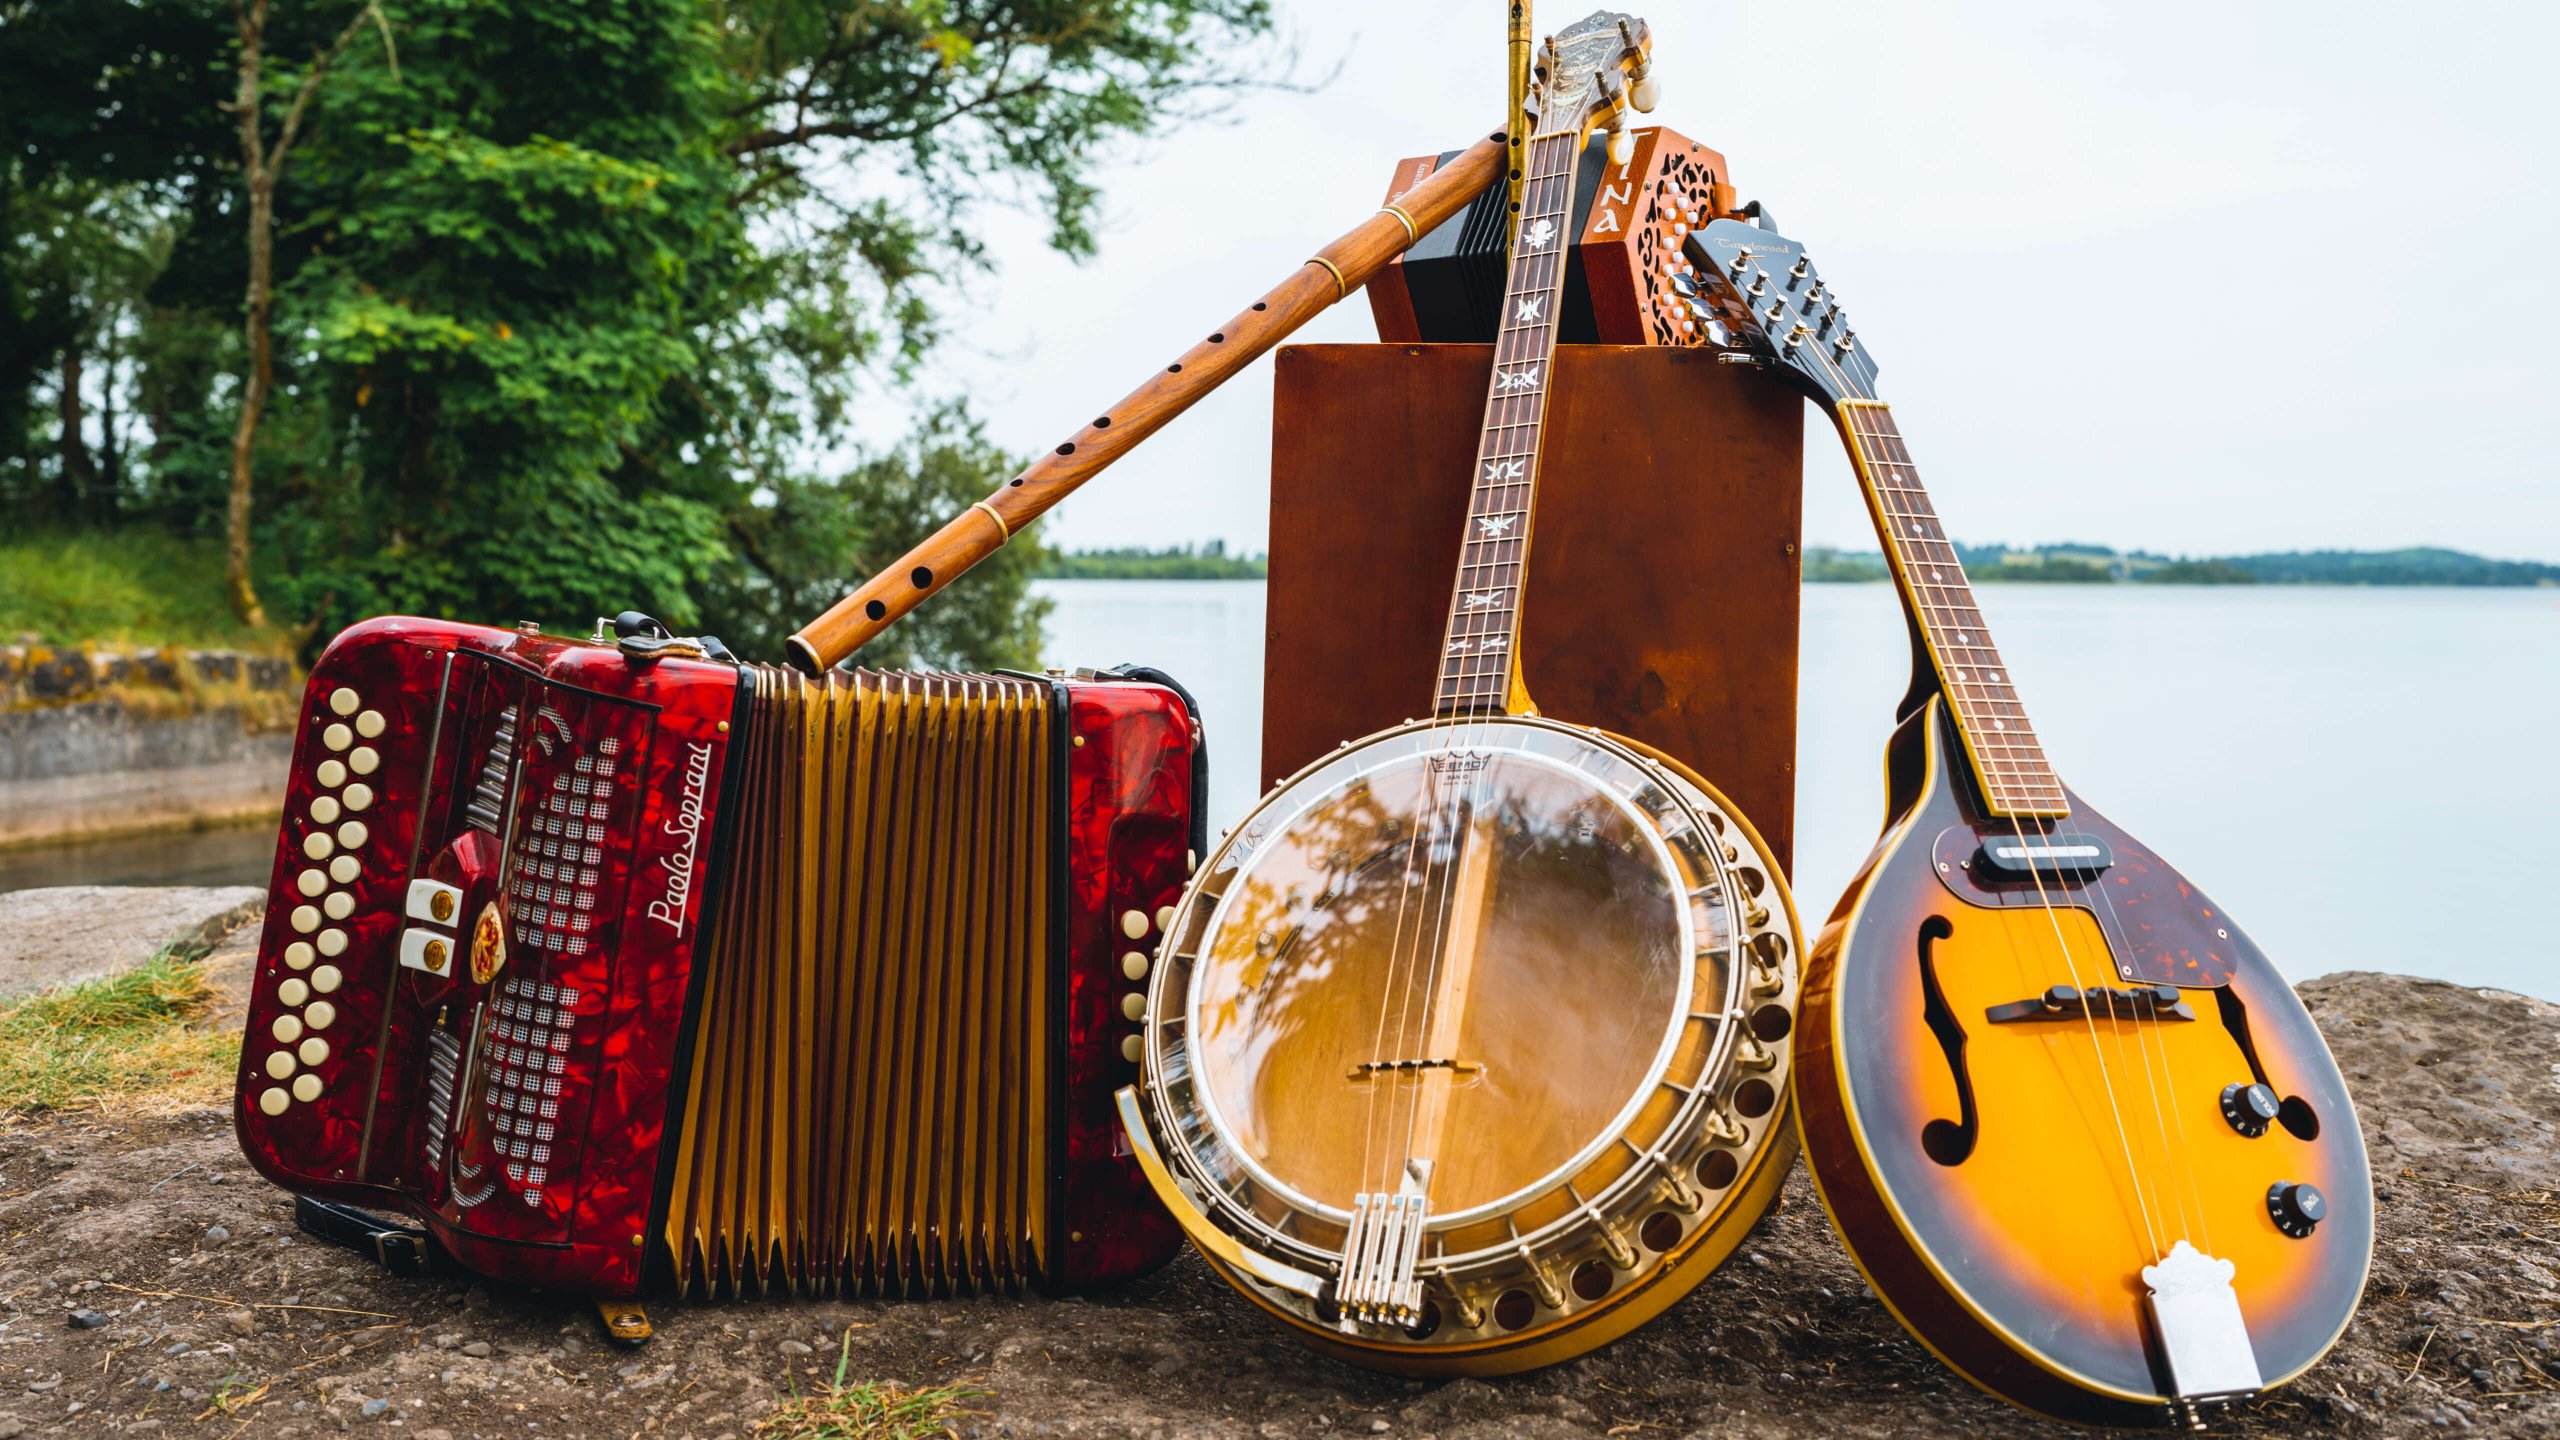 Traditional Irish instruments including a squeezebox and a banjo